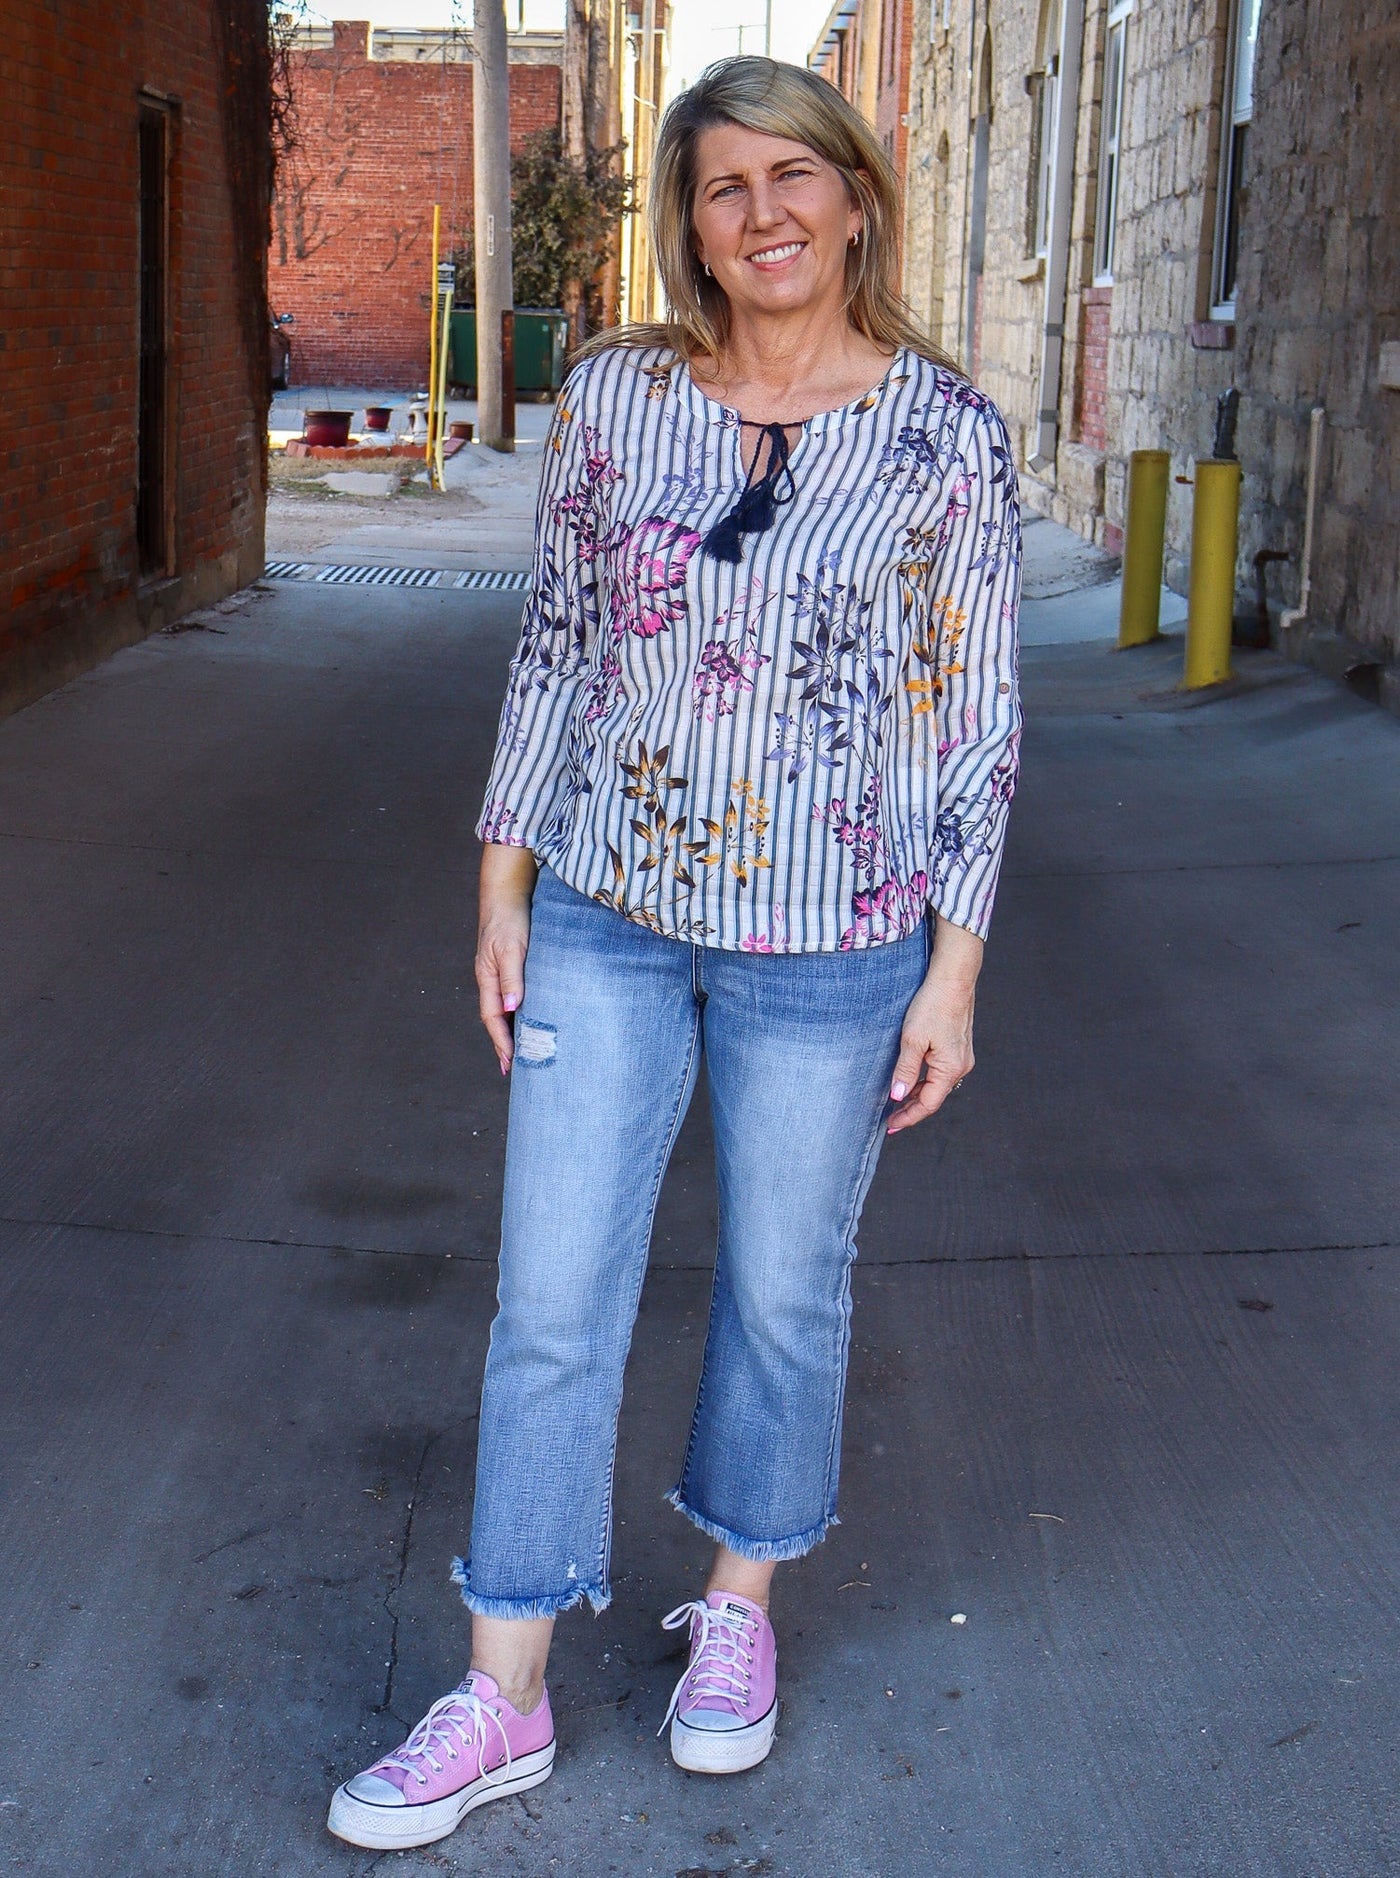 Model is wearing a vertical striped long sleeve blouse with multi color floral detail. The blouse has a string on the neckline for a bowtie detail. Blouse is paired with blue jeans and pink converse.